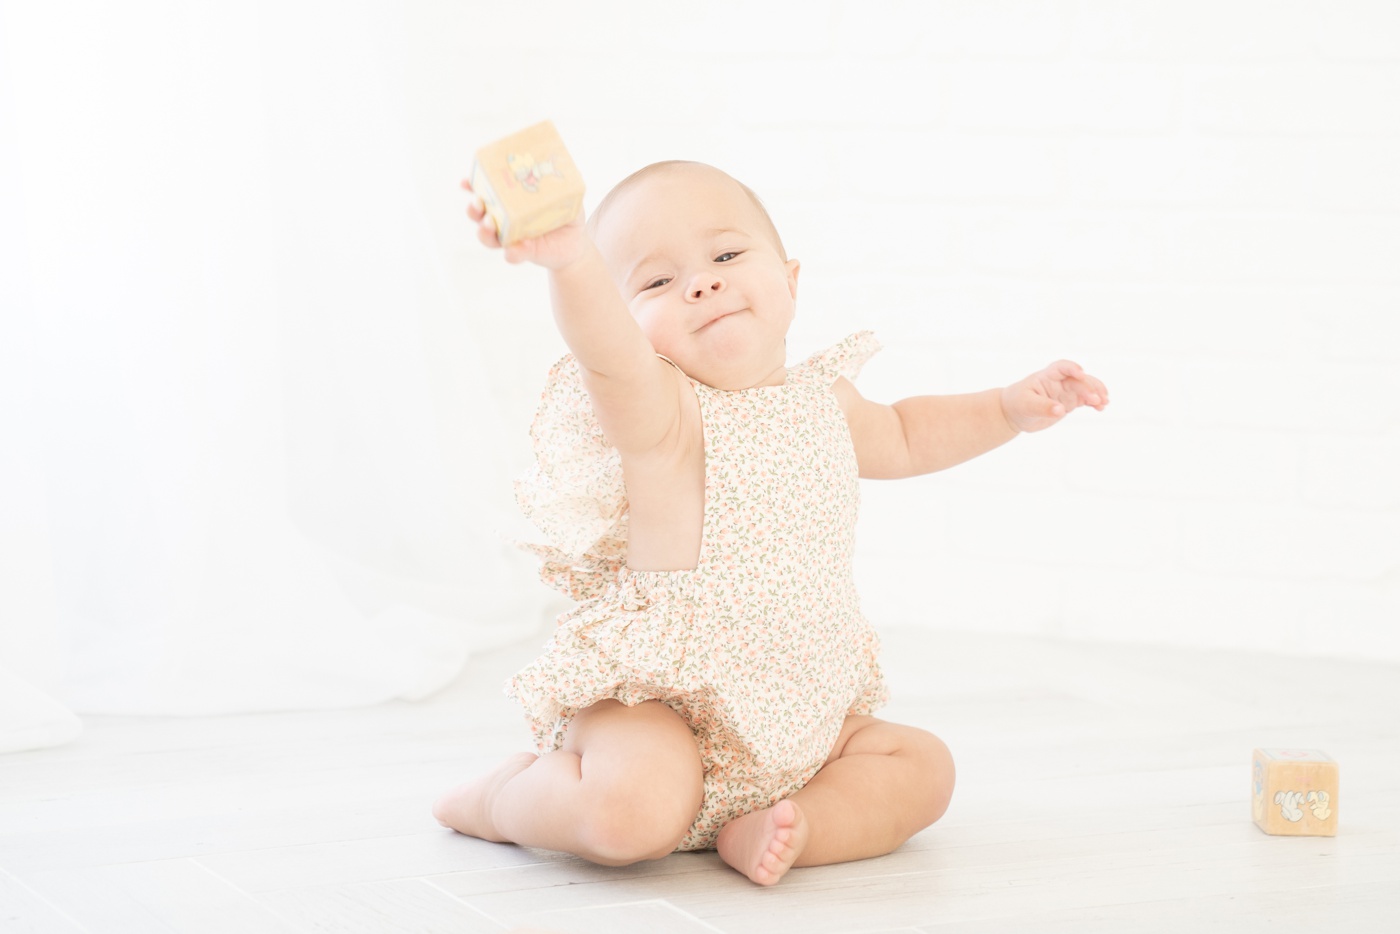 Baby ia floral romper being photographed in an all white Jupiter Fl photo studio playing with wooden blocks